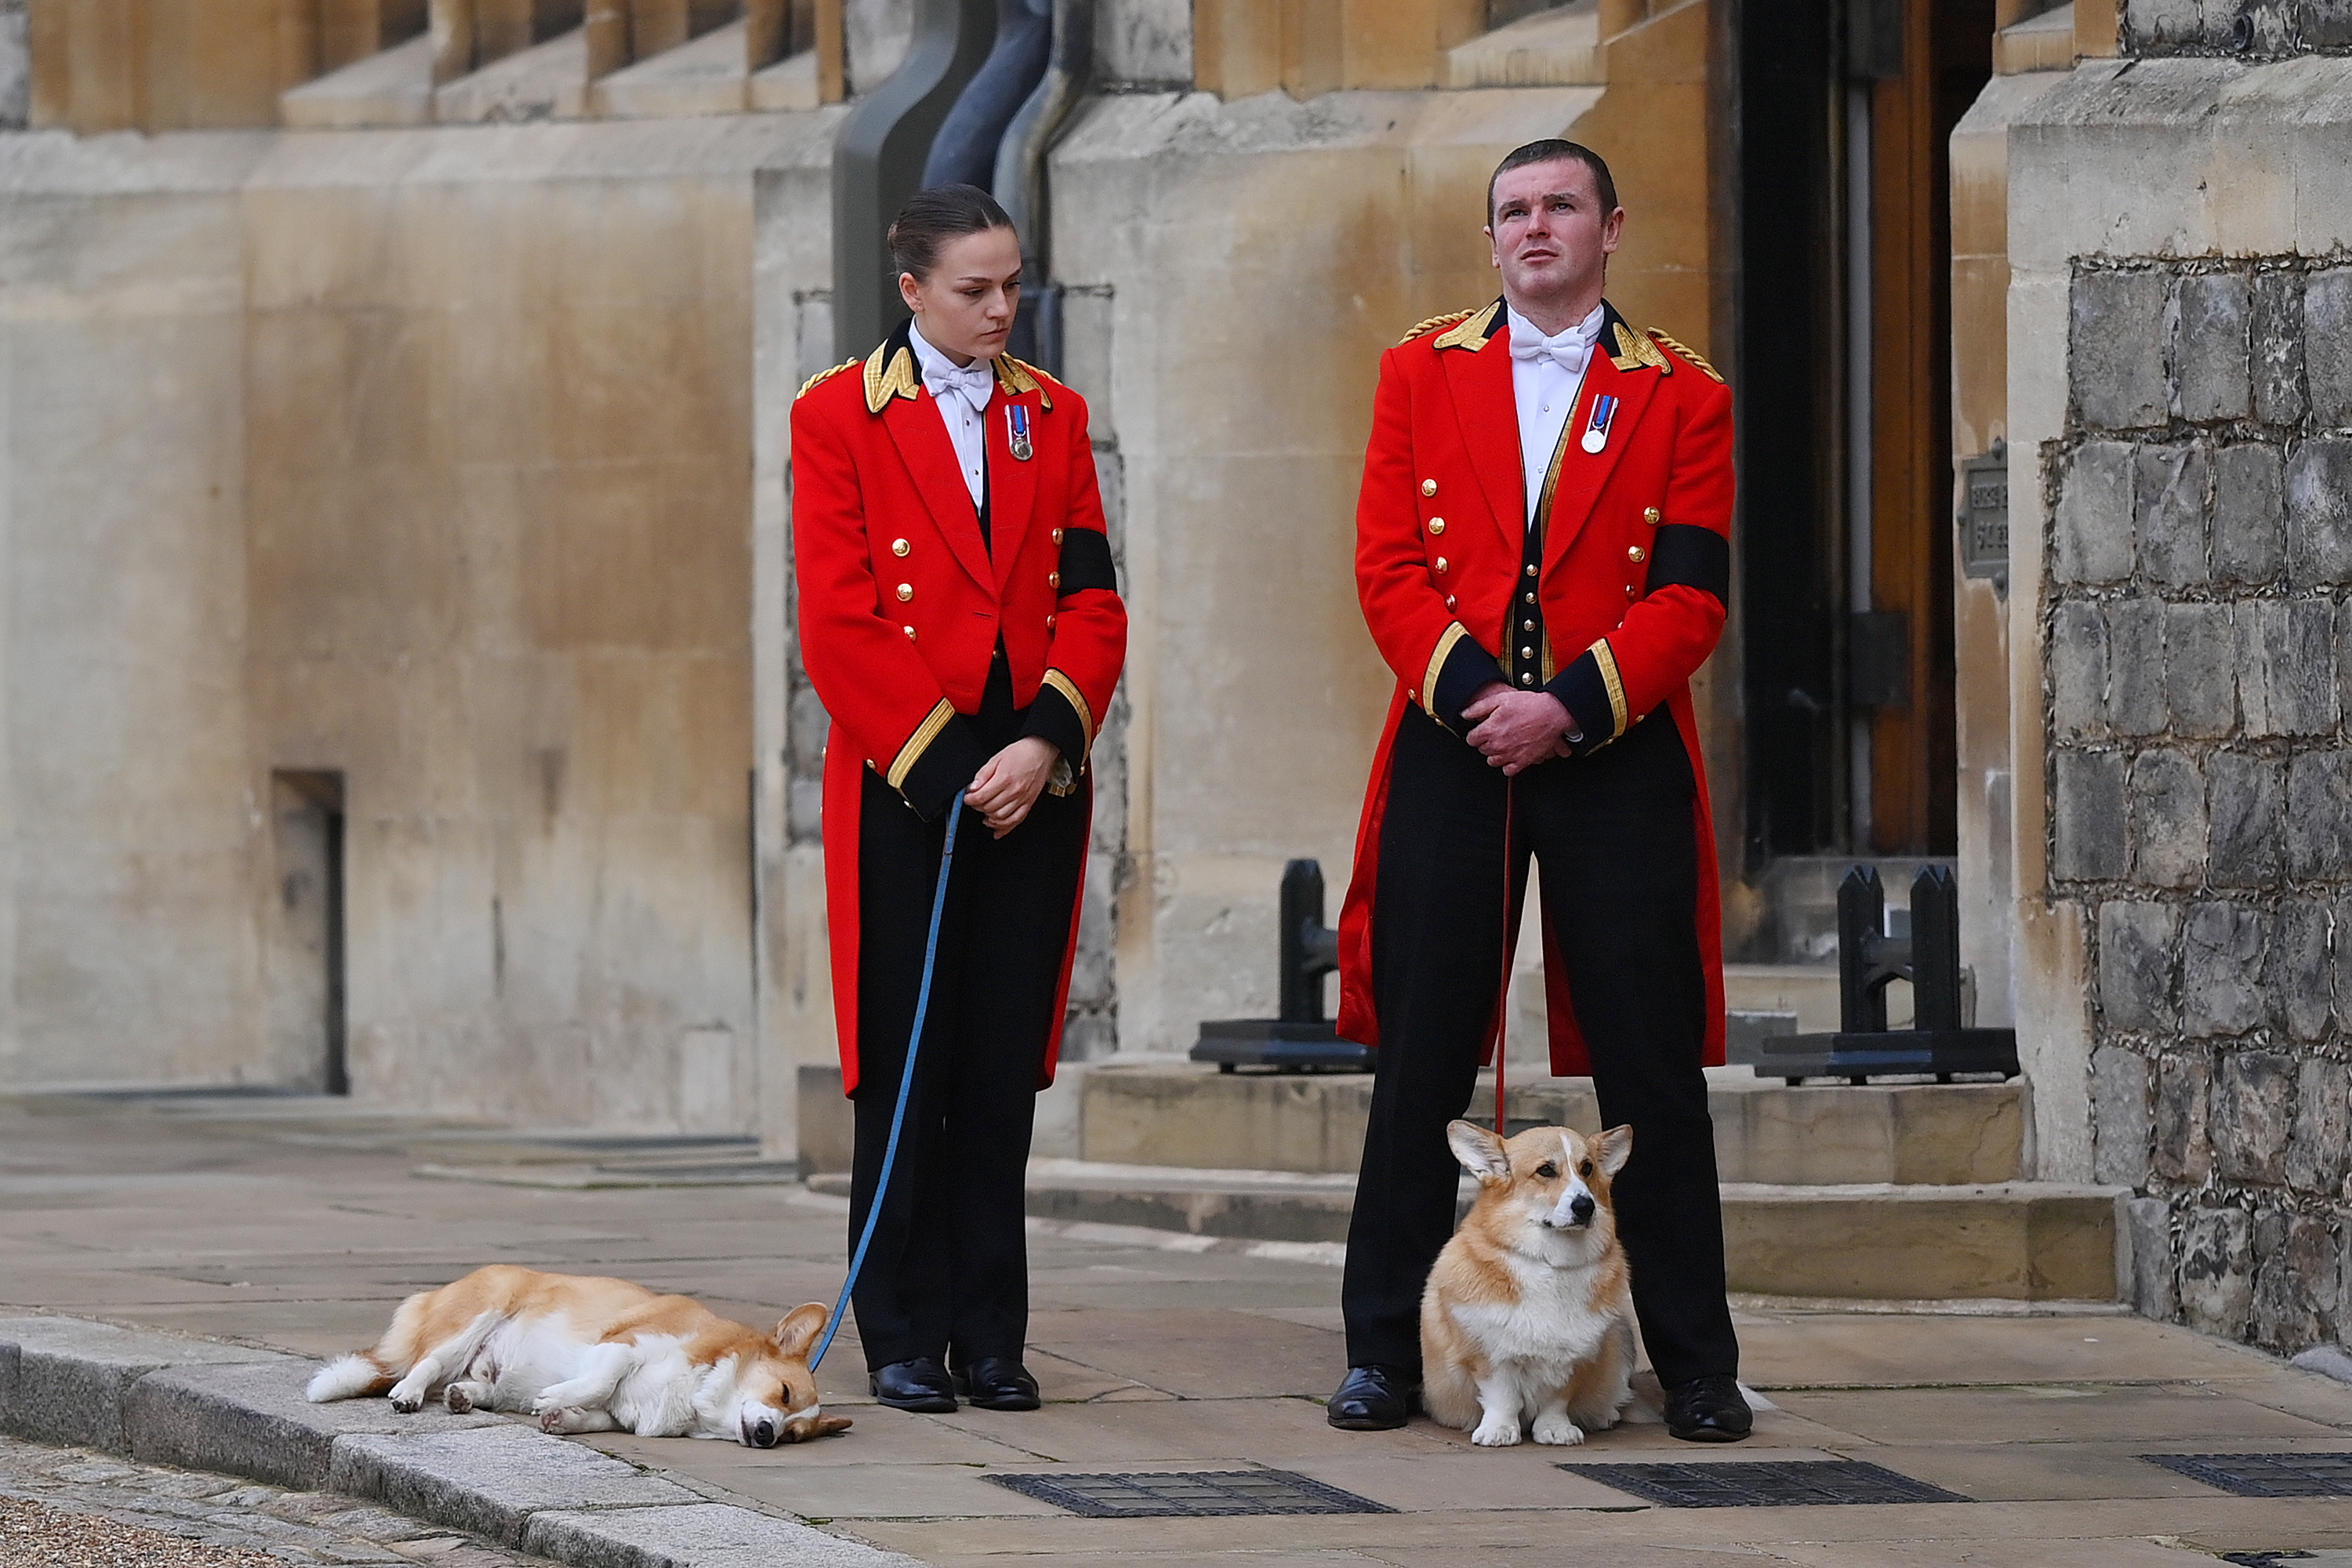 <p>Her dogs were there too: Members of the Royal Household stood with two of Queen Elizabeth's beloved corgis, Muick and Sandy, as they awaited the arrival of <a href="https://www.wonderwall.com/celebrity/royals/best-photos-from-queen-elizabeth-ii-funeral-king-charles-princes-william-prince-harry-george-charlotte-kate-meghan652347.gallery">the monarch's funeral cortege</a> at Windsor Castle in Windsor, England, on Sept. 19, 2022. </p>